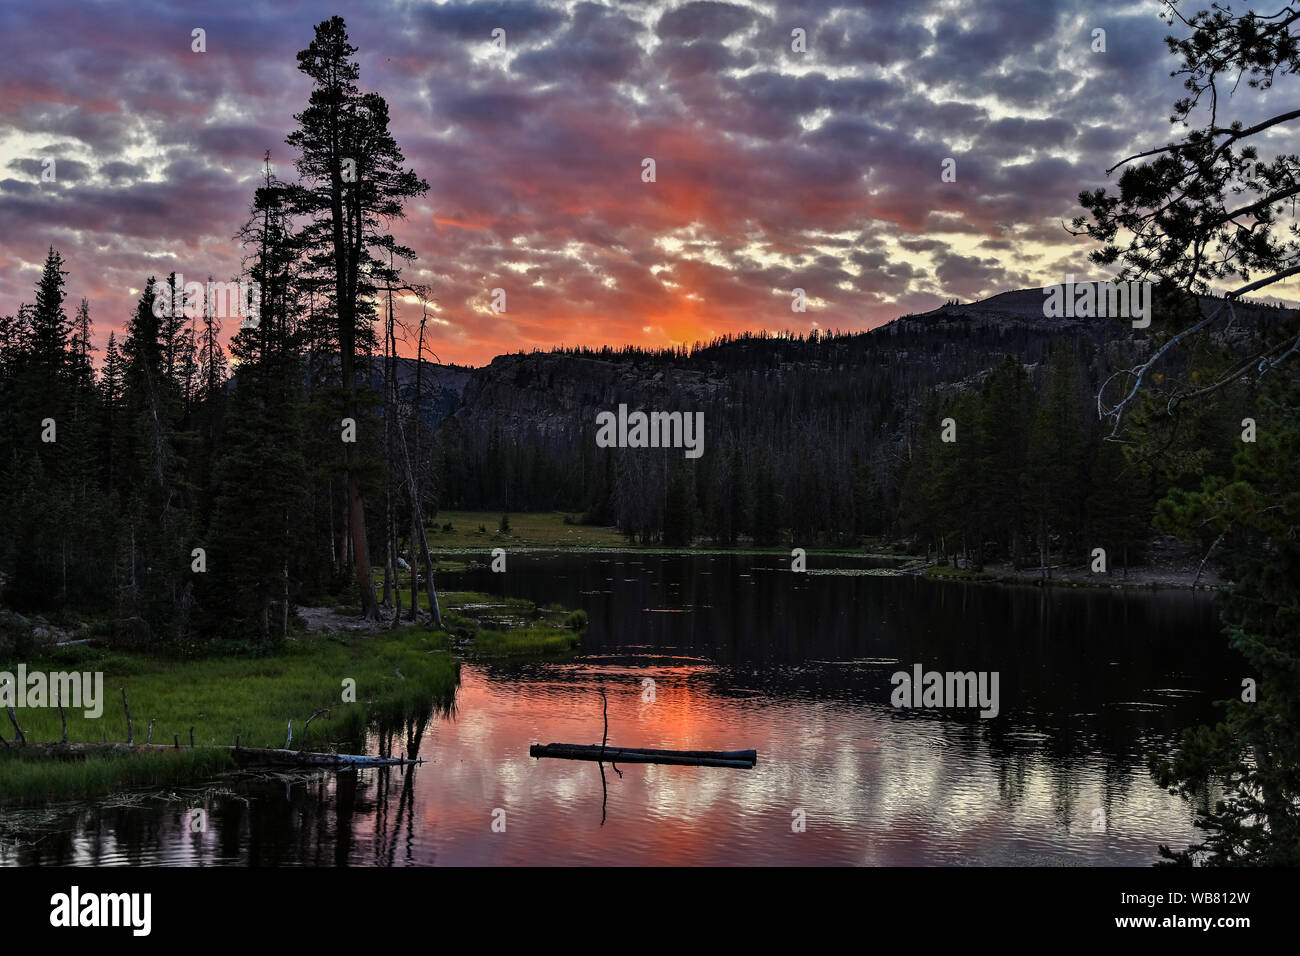 The setting sun lights up the clouds and reflects on Butterfly Lake along SR 150, the Mirror Lake Scenic Byway, in the Uinta Mountain Range, Utah, USA. Stock Photo